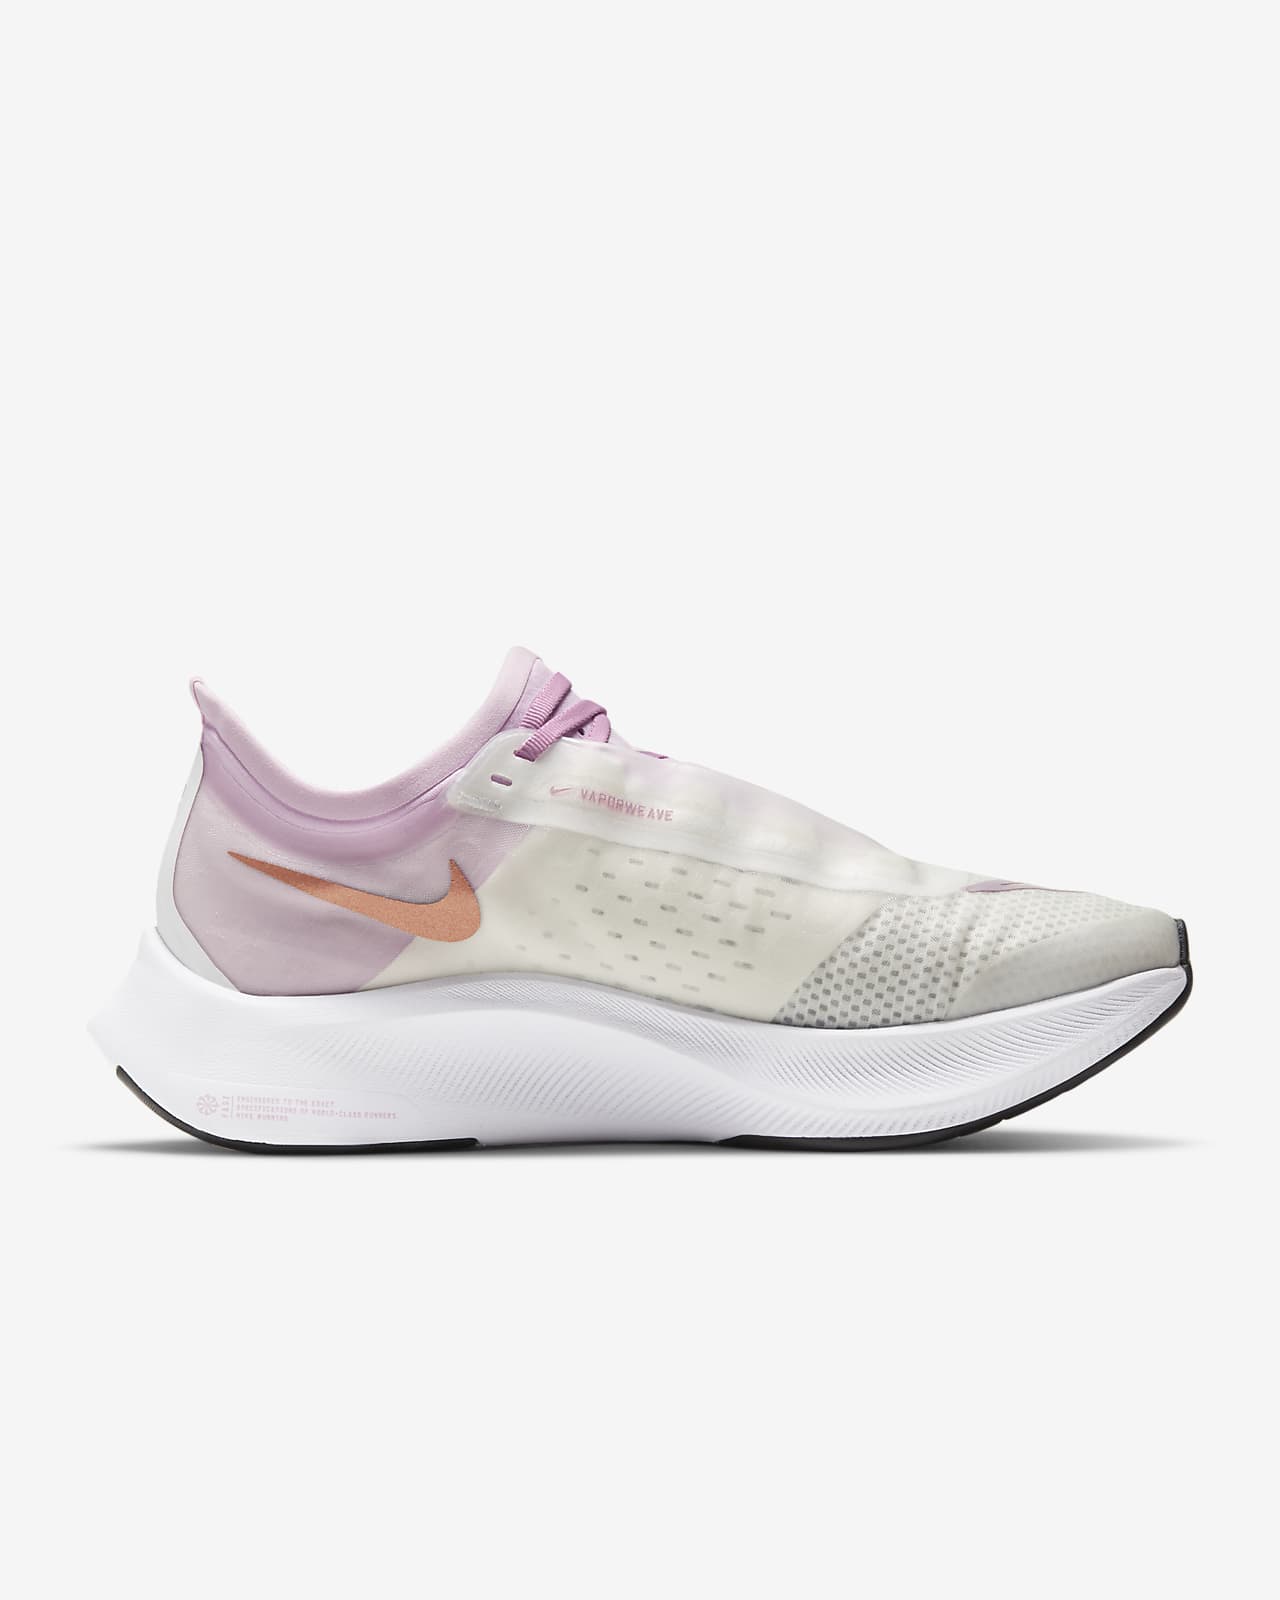 nike zoom fly 3 all white